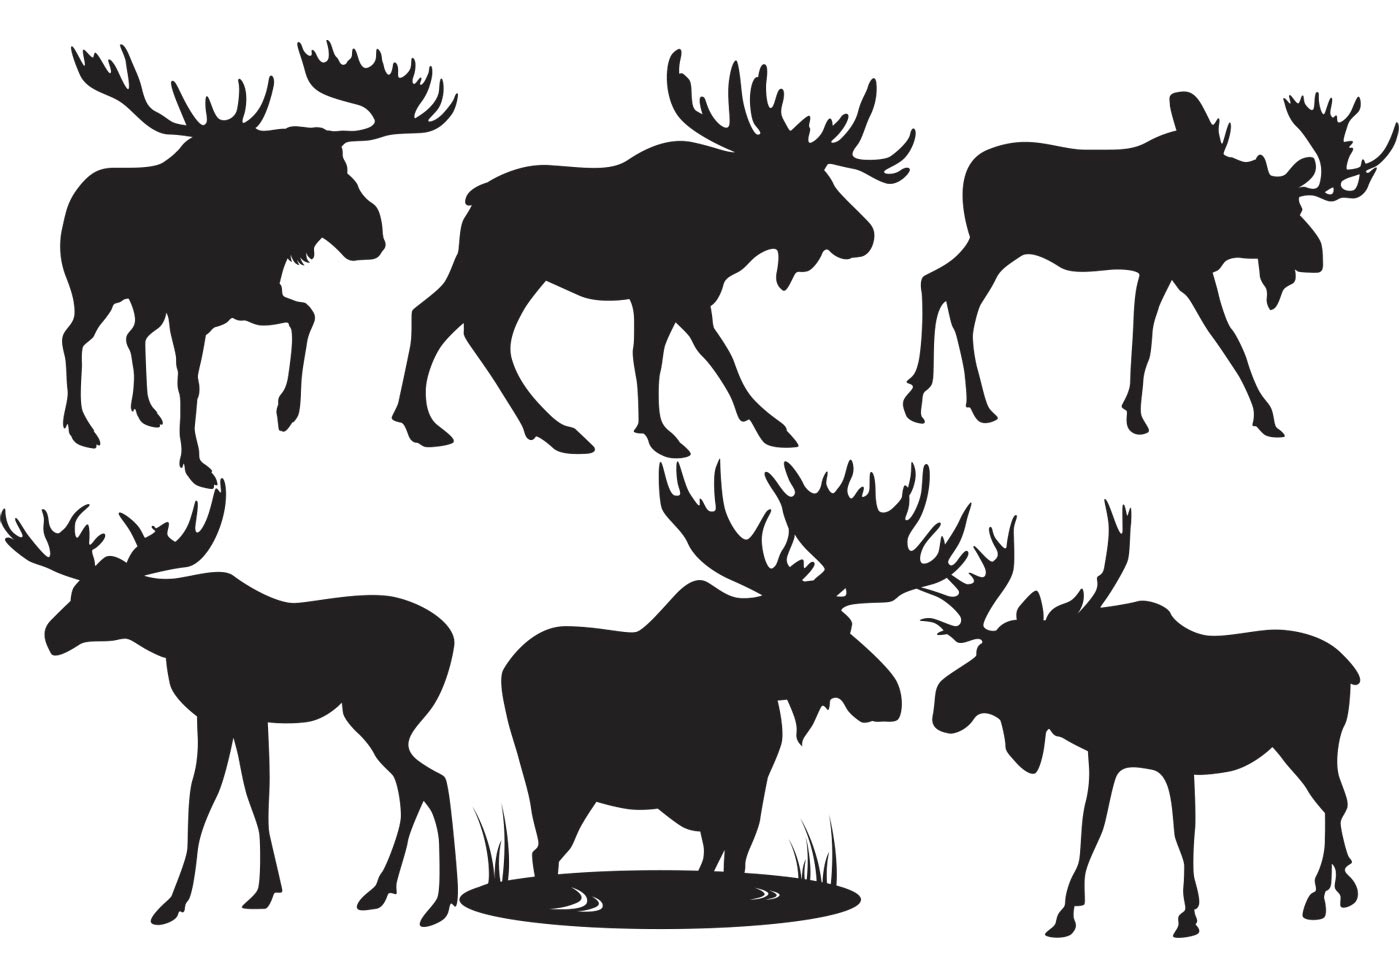 Download Moose Silhouette Free Vector Art - (93 Free Downloads)